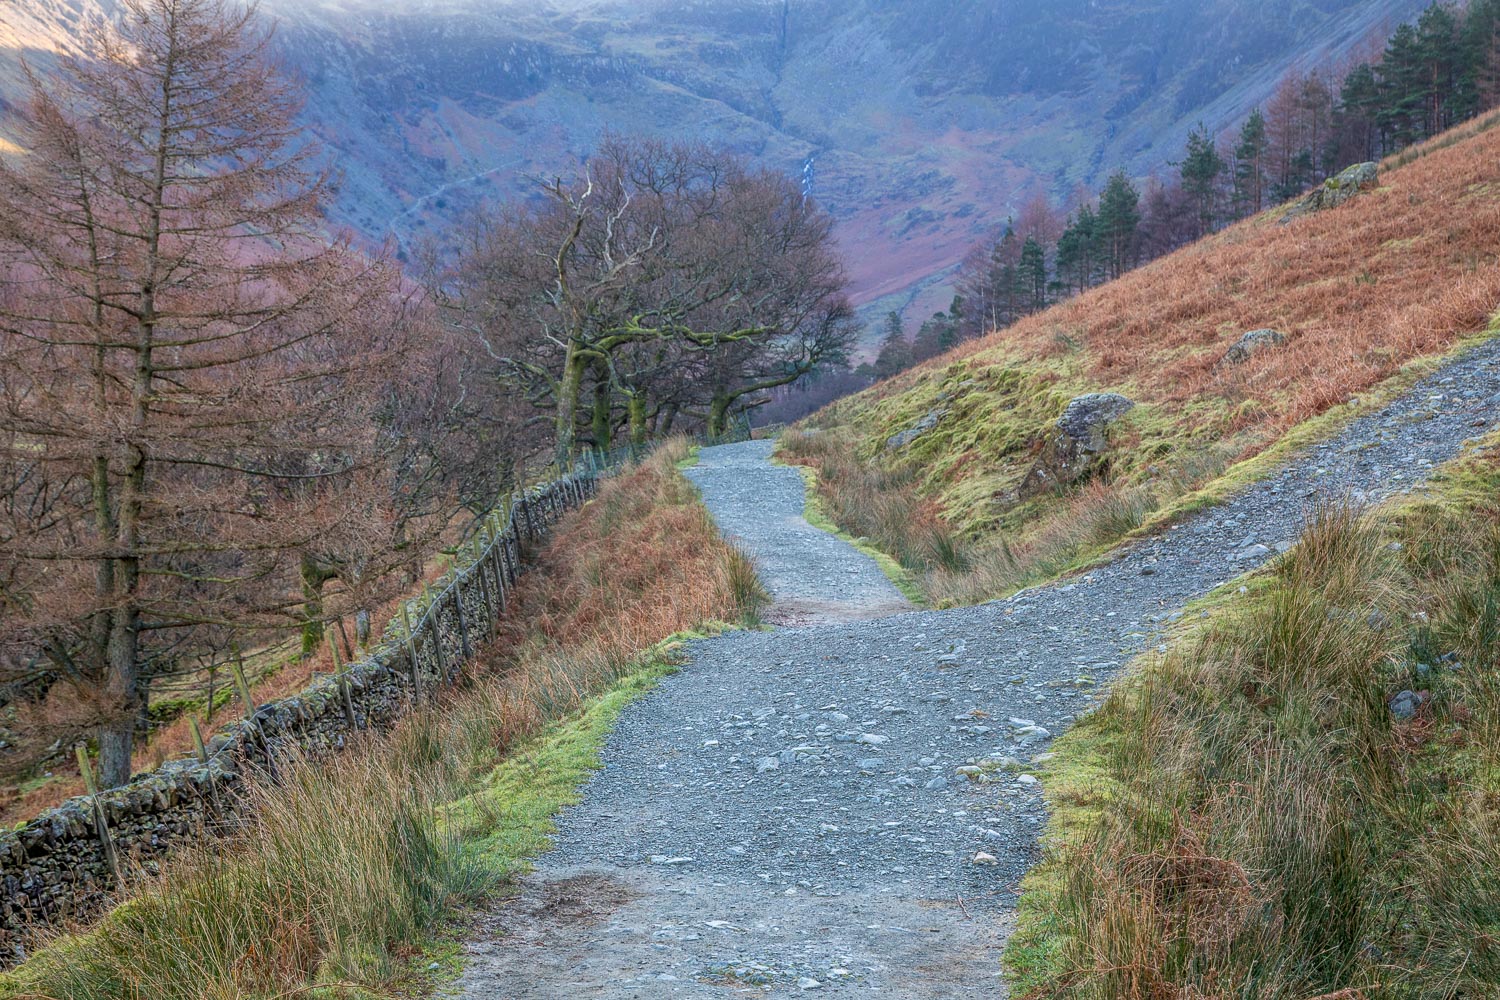 Buttermere path